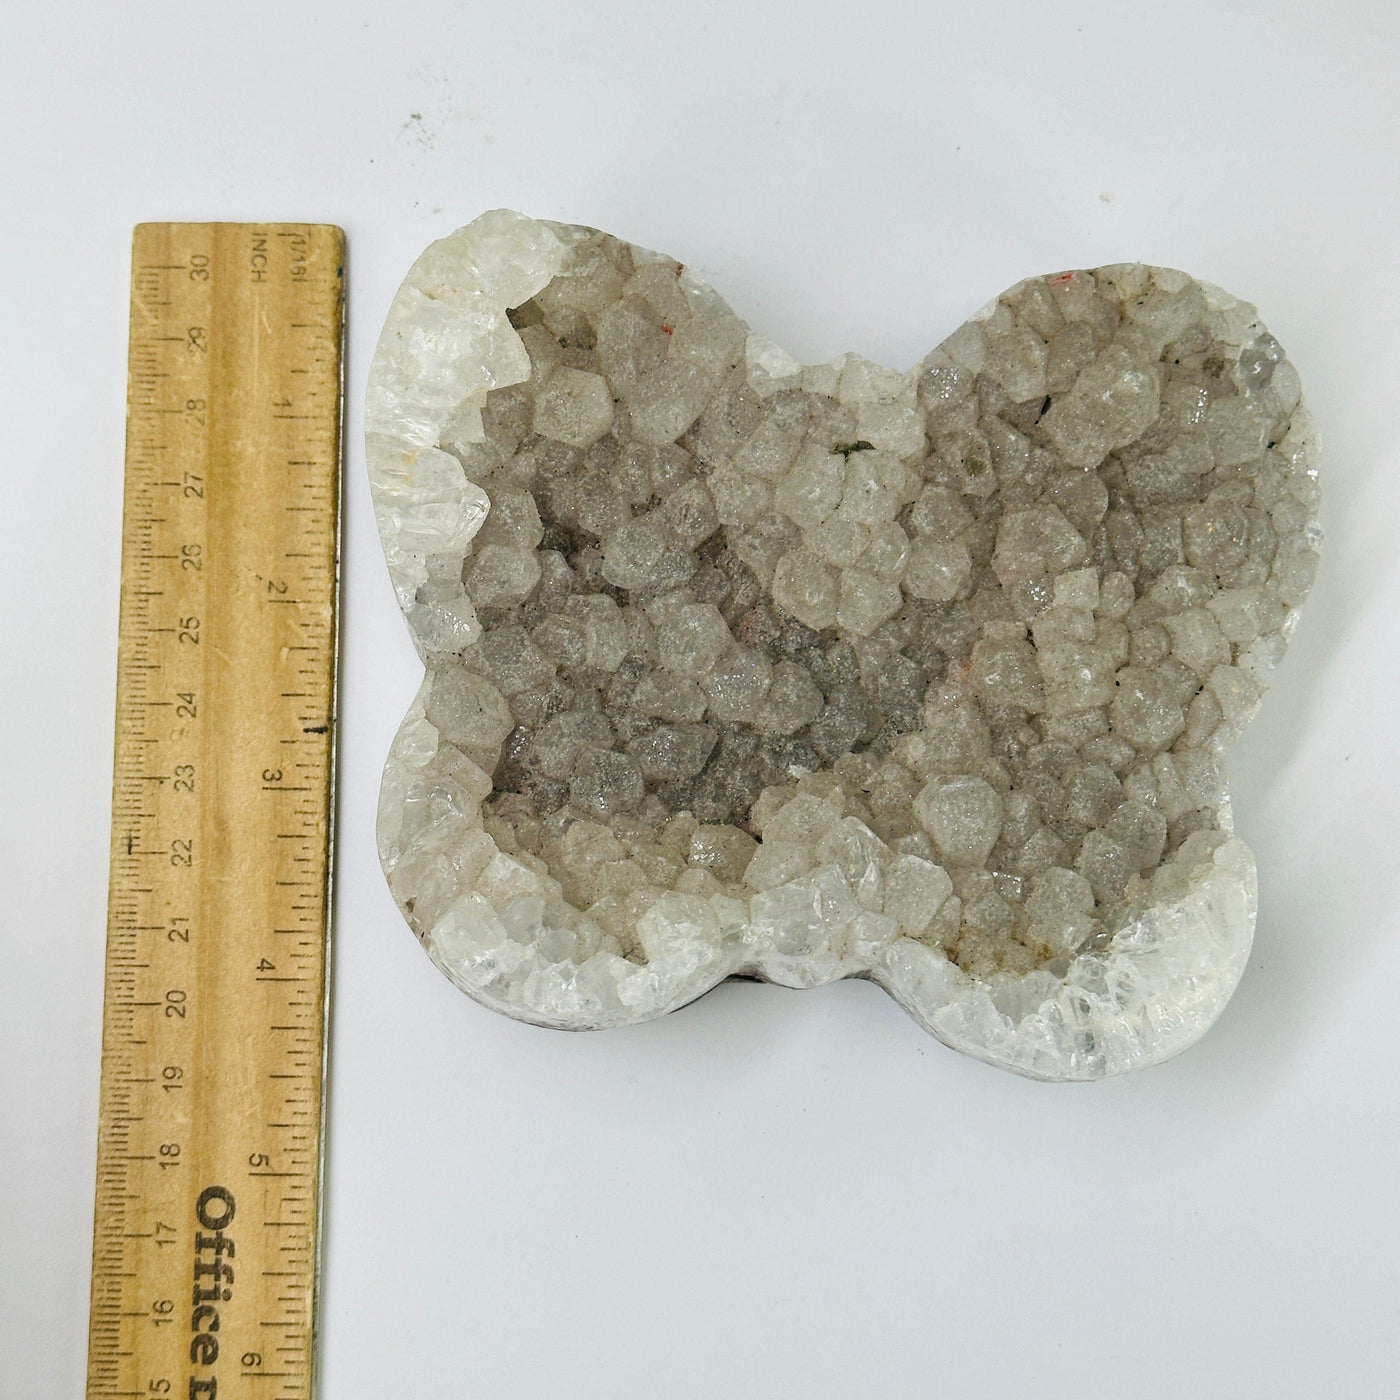 druzy butterfly next to a ruler for size reference